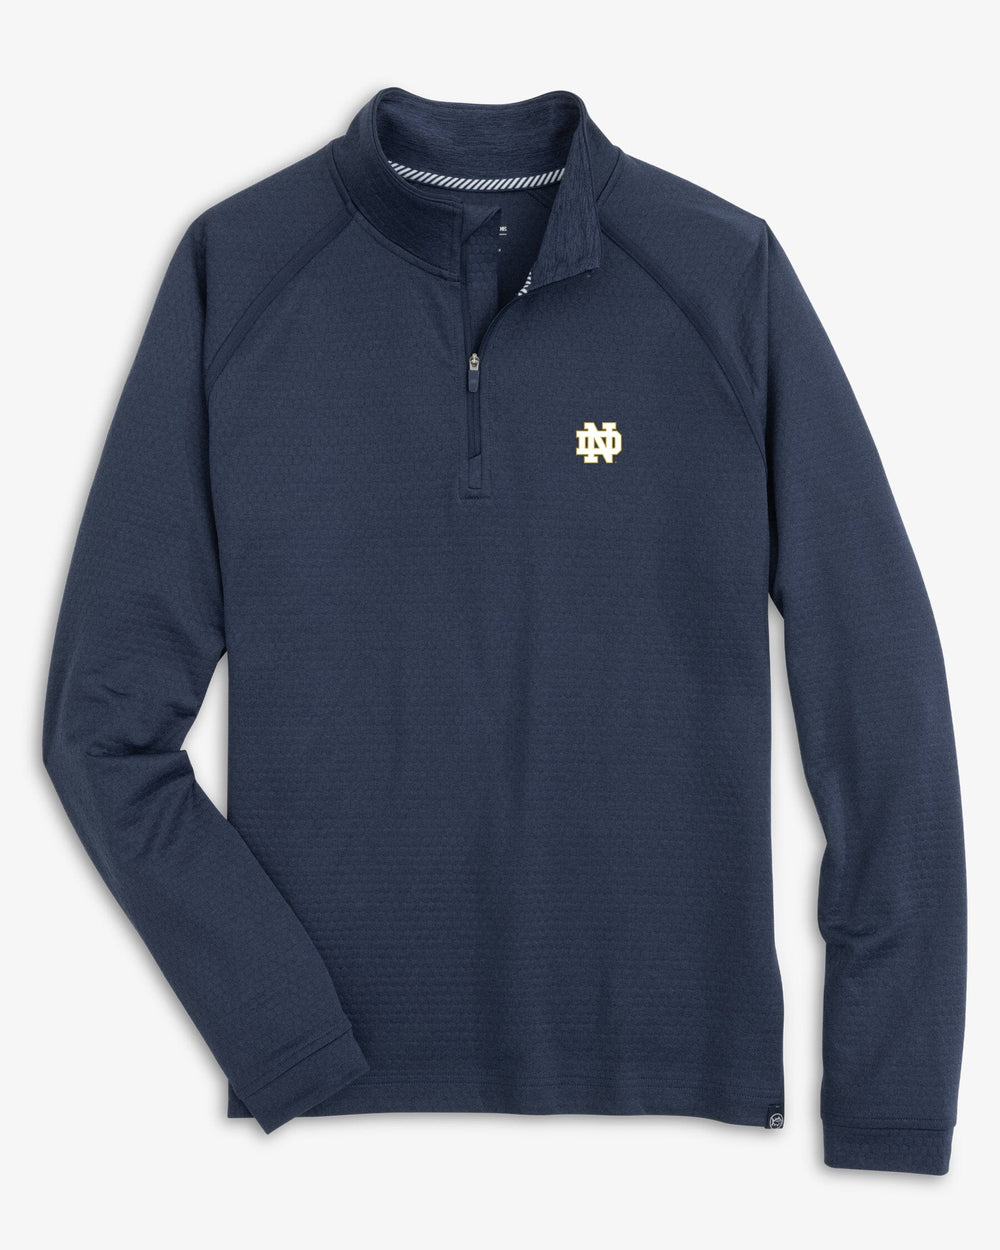 The front view of the Notre Dame Fighting Irish Scuttle Heather Quarter Zip by Southern Tide - Navy